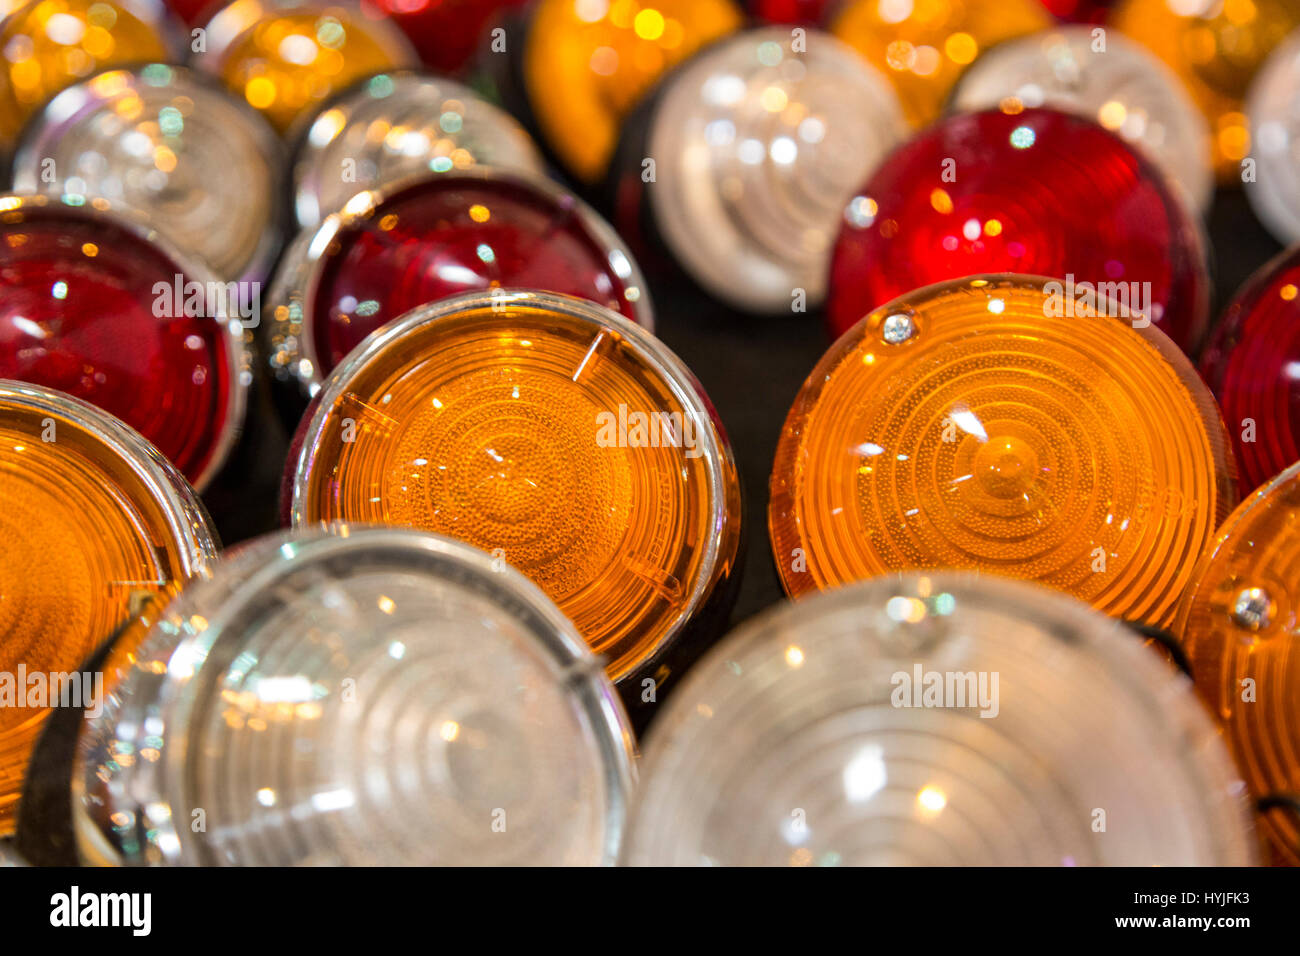 Essen, Germany. 5th Apr, 2017. Lamps, spares. Press preview of the 29th Techno-Classica motor show in Essen, show for vintage, classic and prestige cars and motor sports. The motor show runs from 5 to 9 April 2017. Credit: OnTheRoad/Alamy Live News Stock Photo